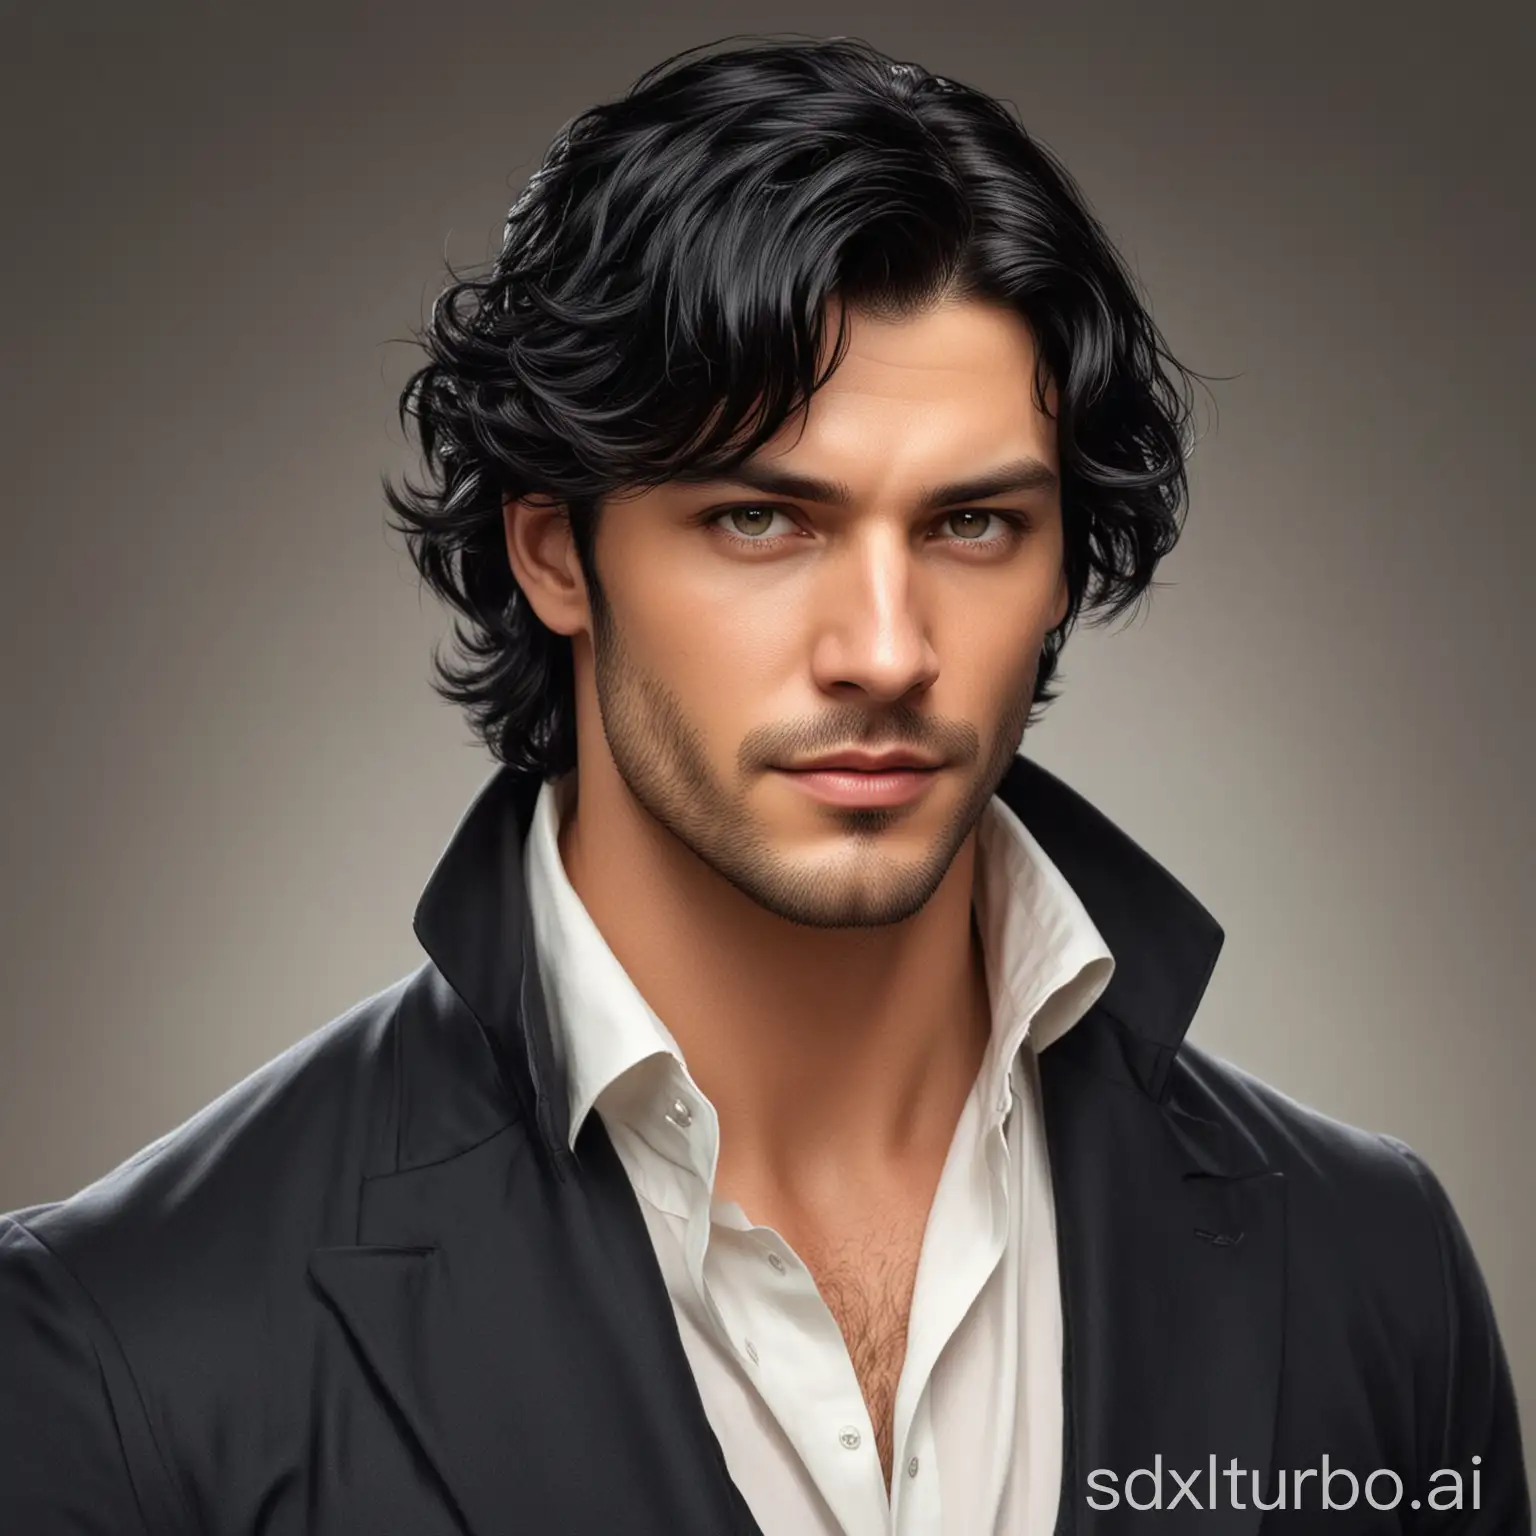 Handsome-Man-in-His-Thirties-Artistic-Depiction-of-a-Toned-Attractive-Book-Character